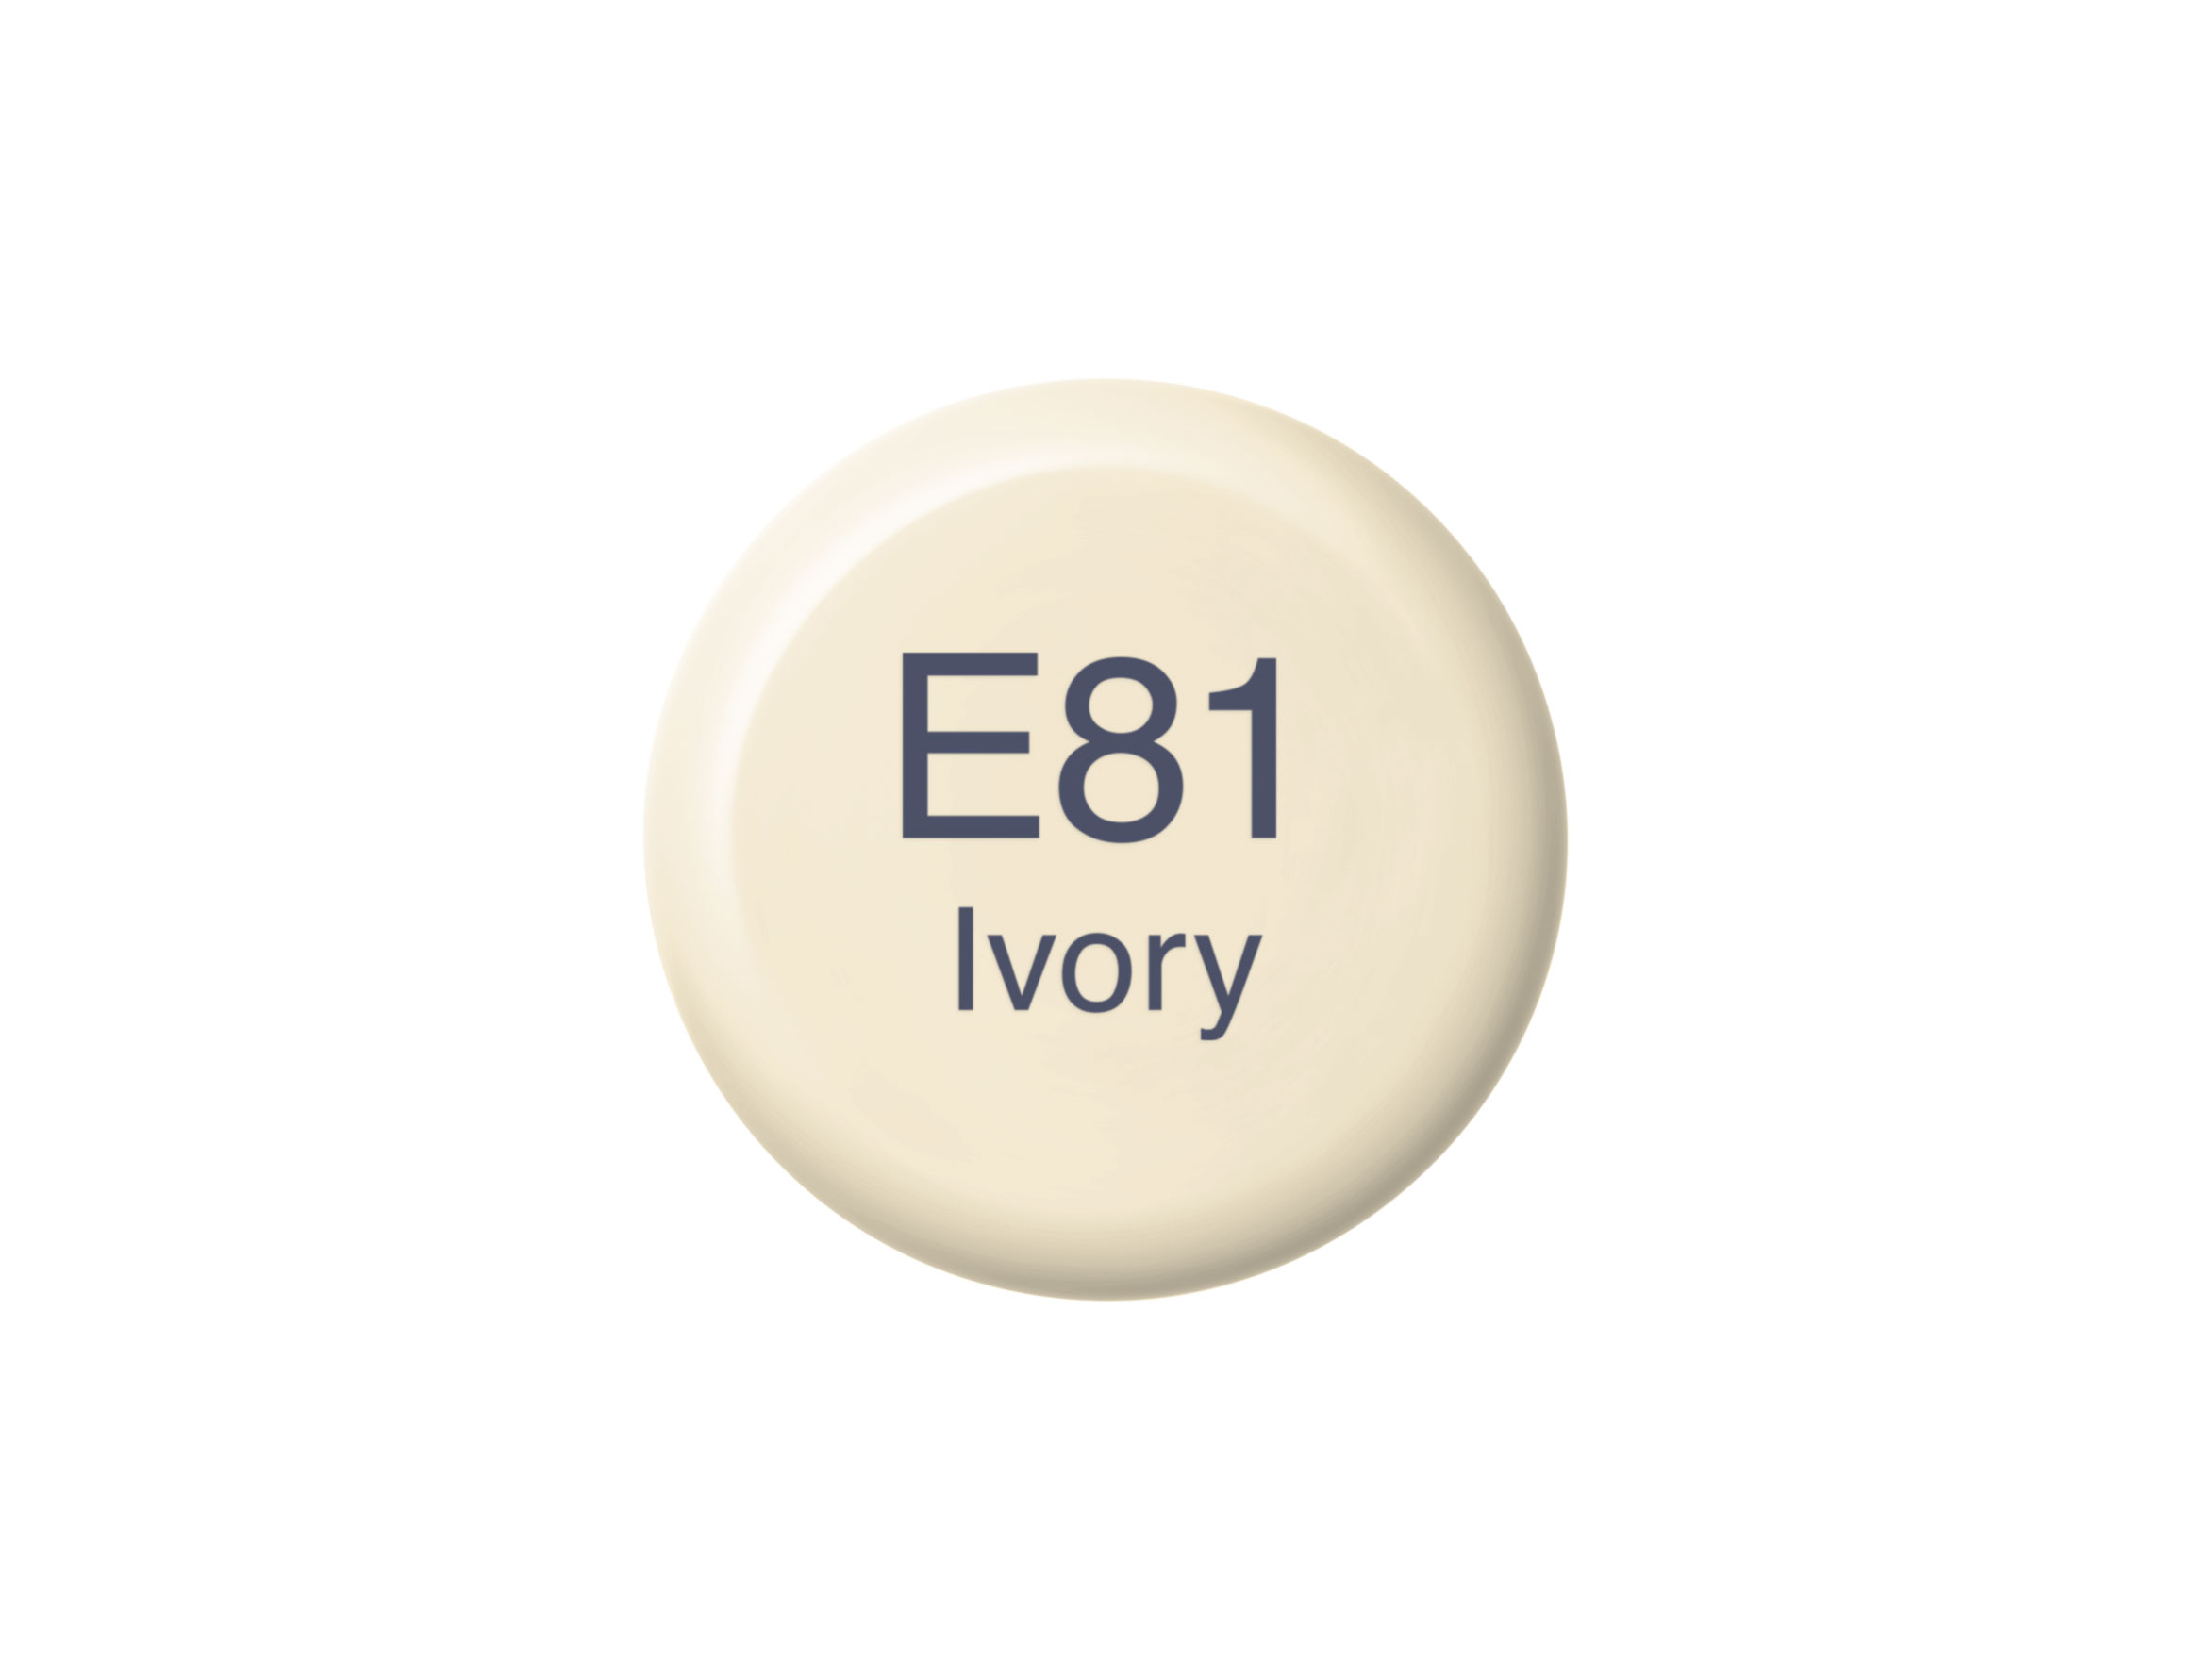 Copic Ink E81 Ivory